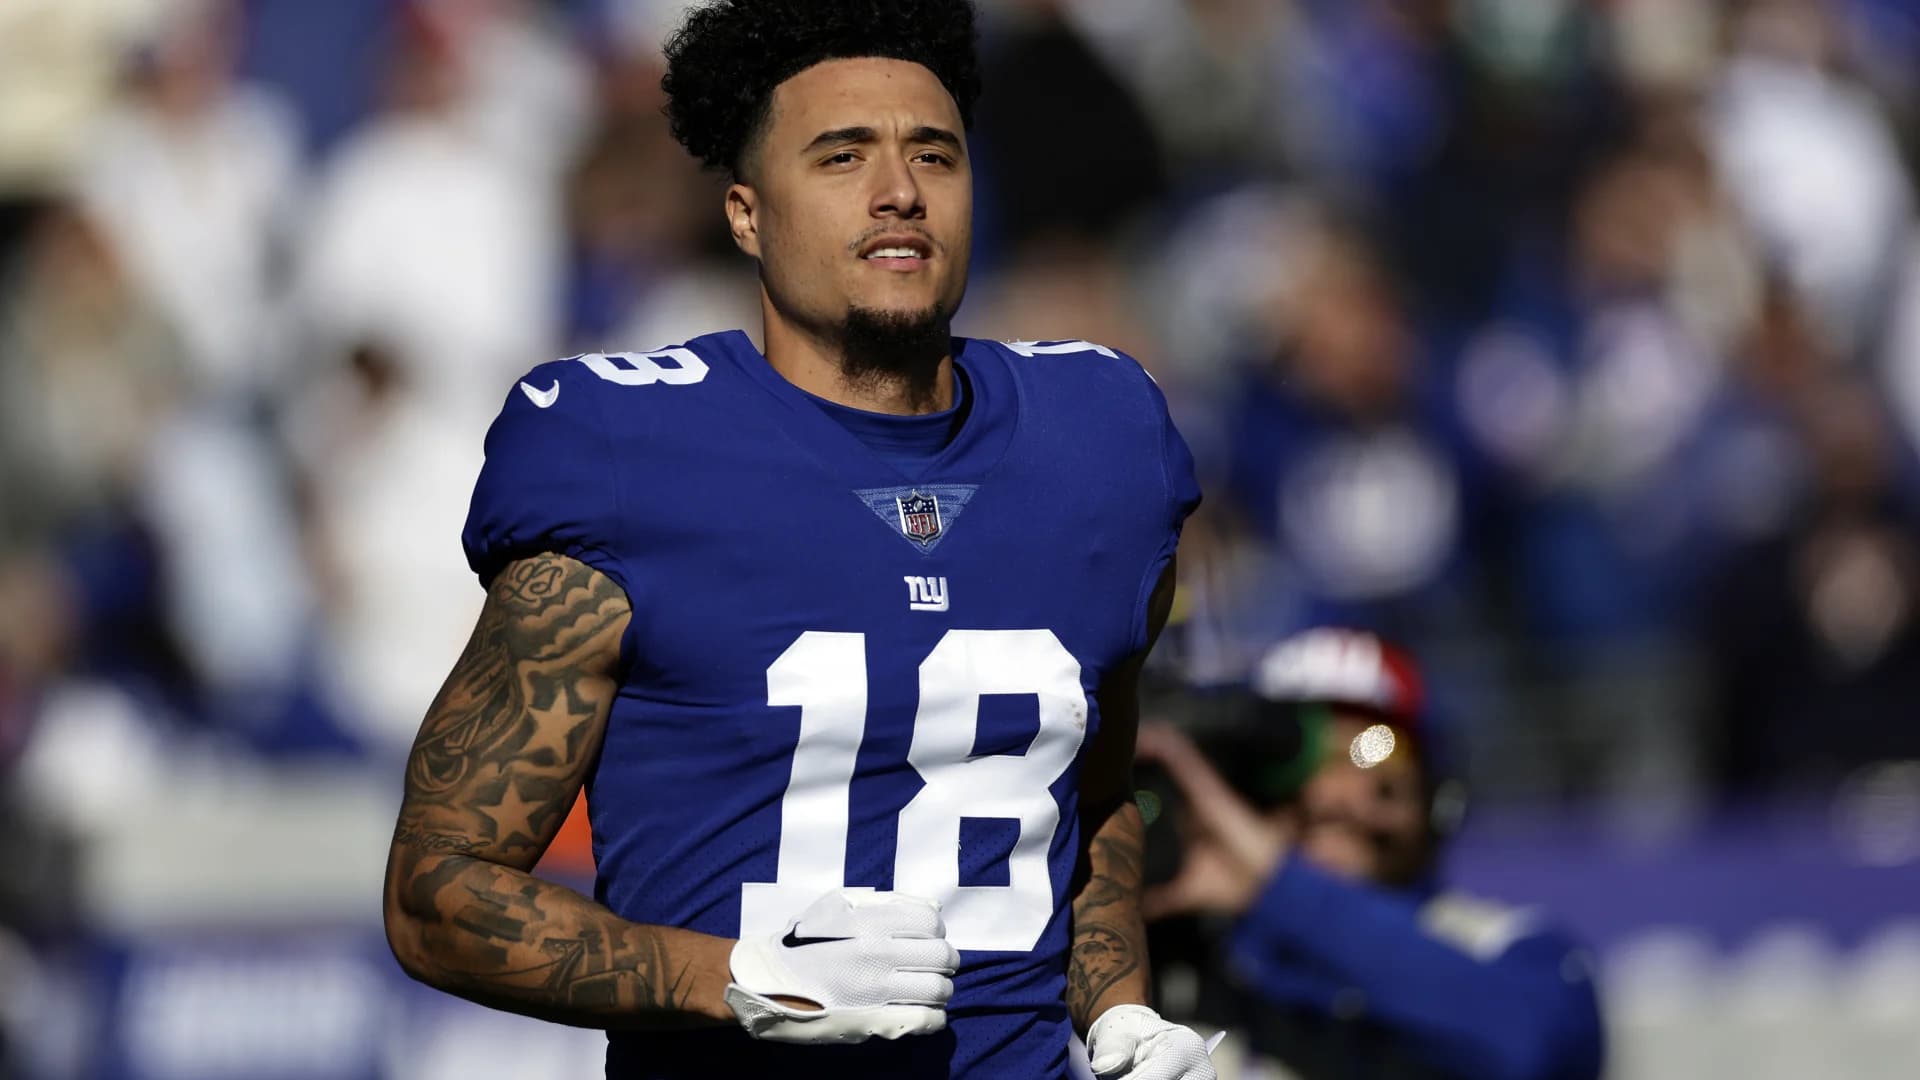 Giants re-sign WR Isaiah Hodgins, who had breakout season